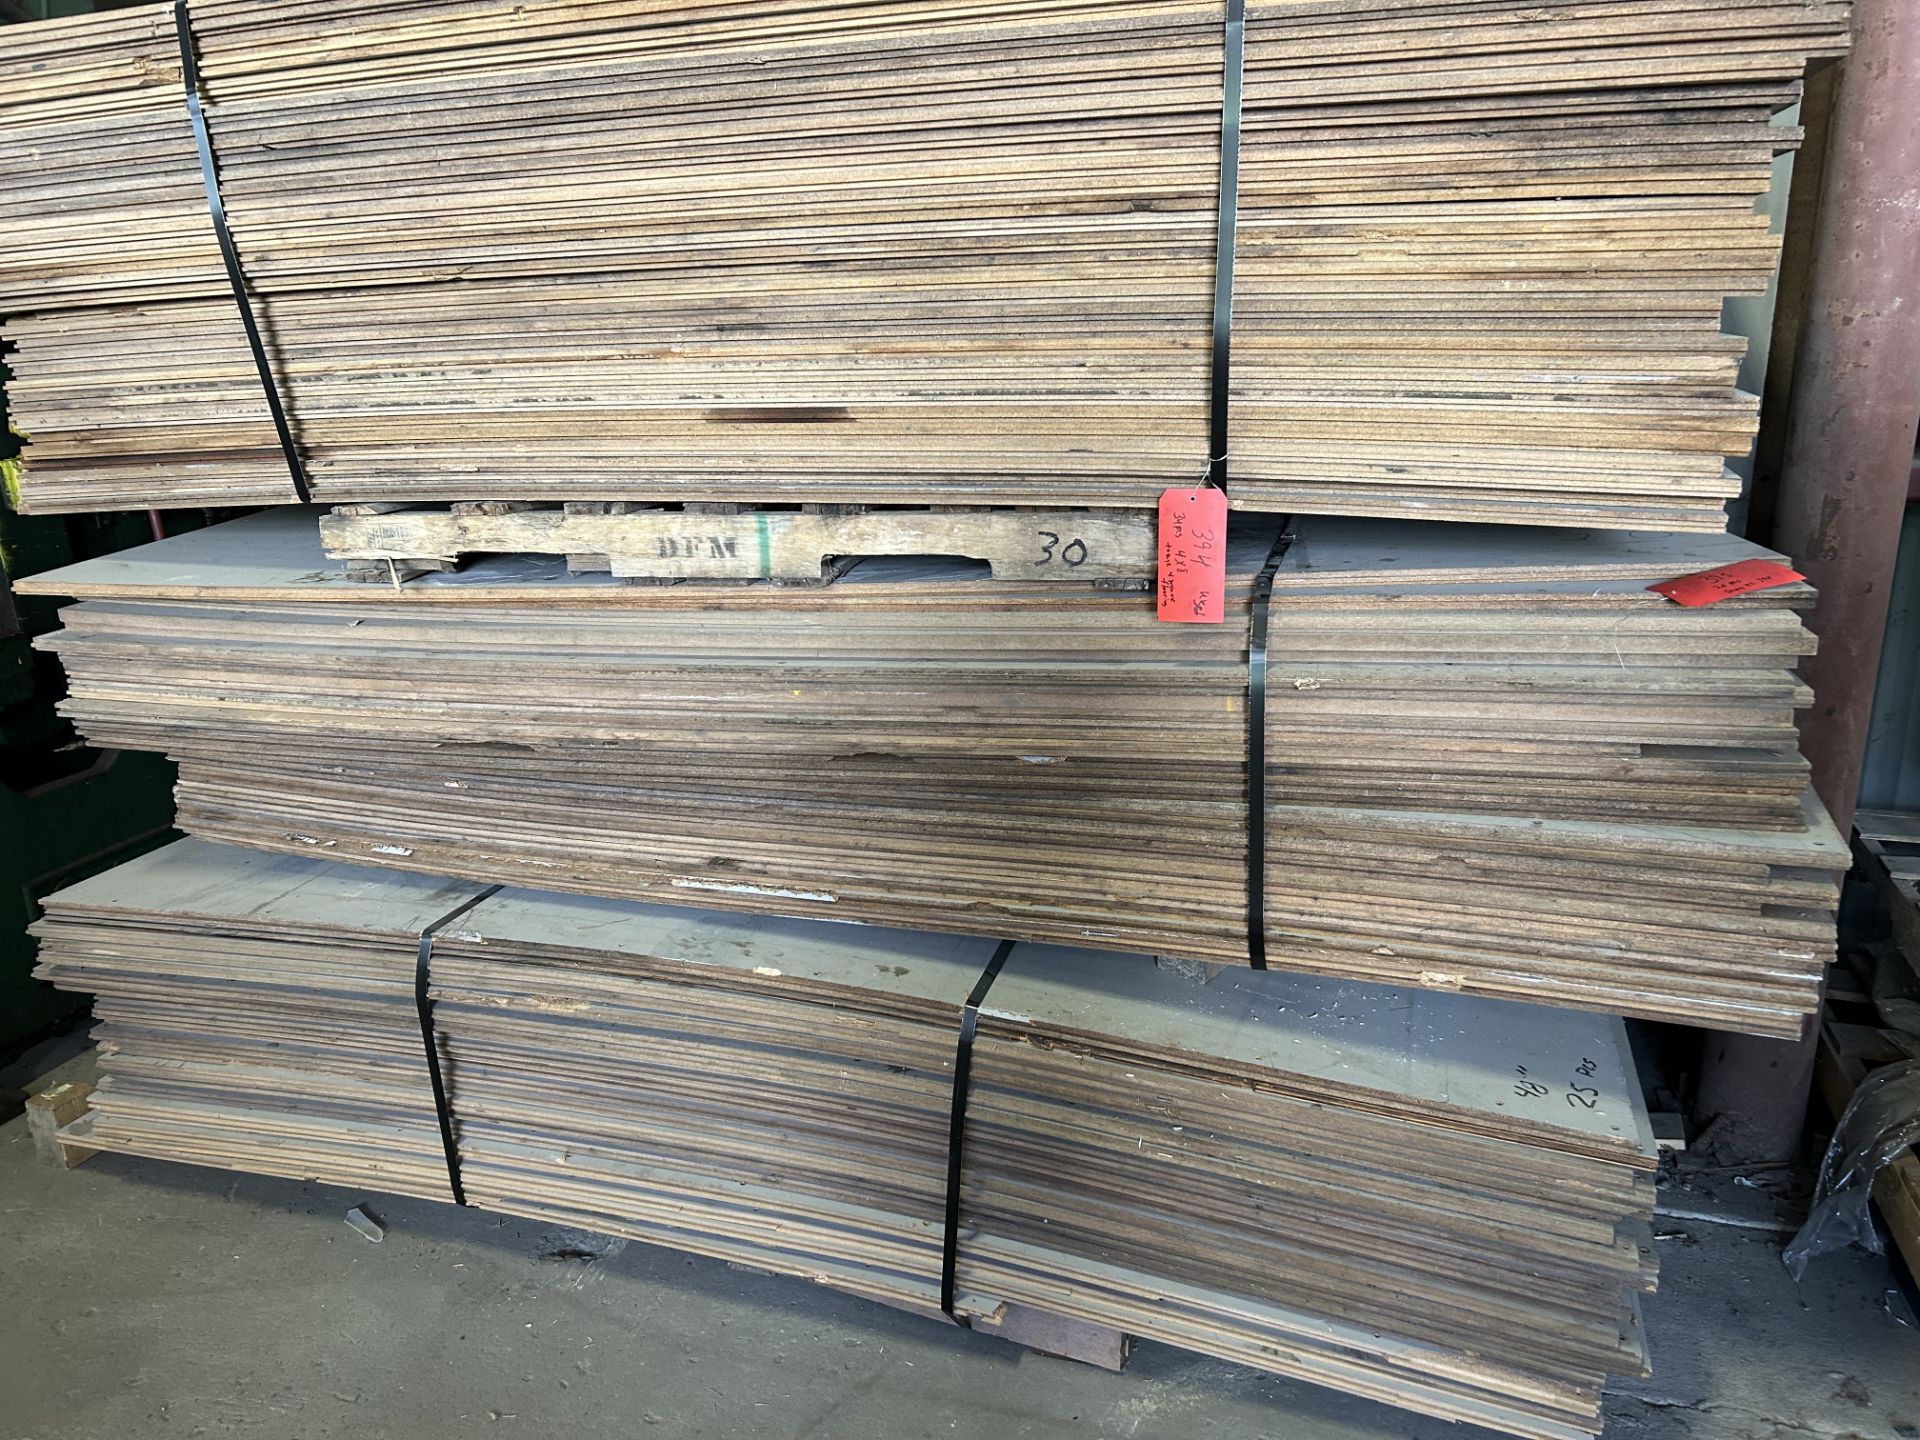 25pcs of 4x8 Tongue and Groove Flooring - Used